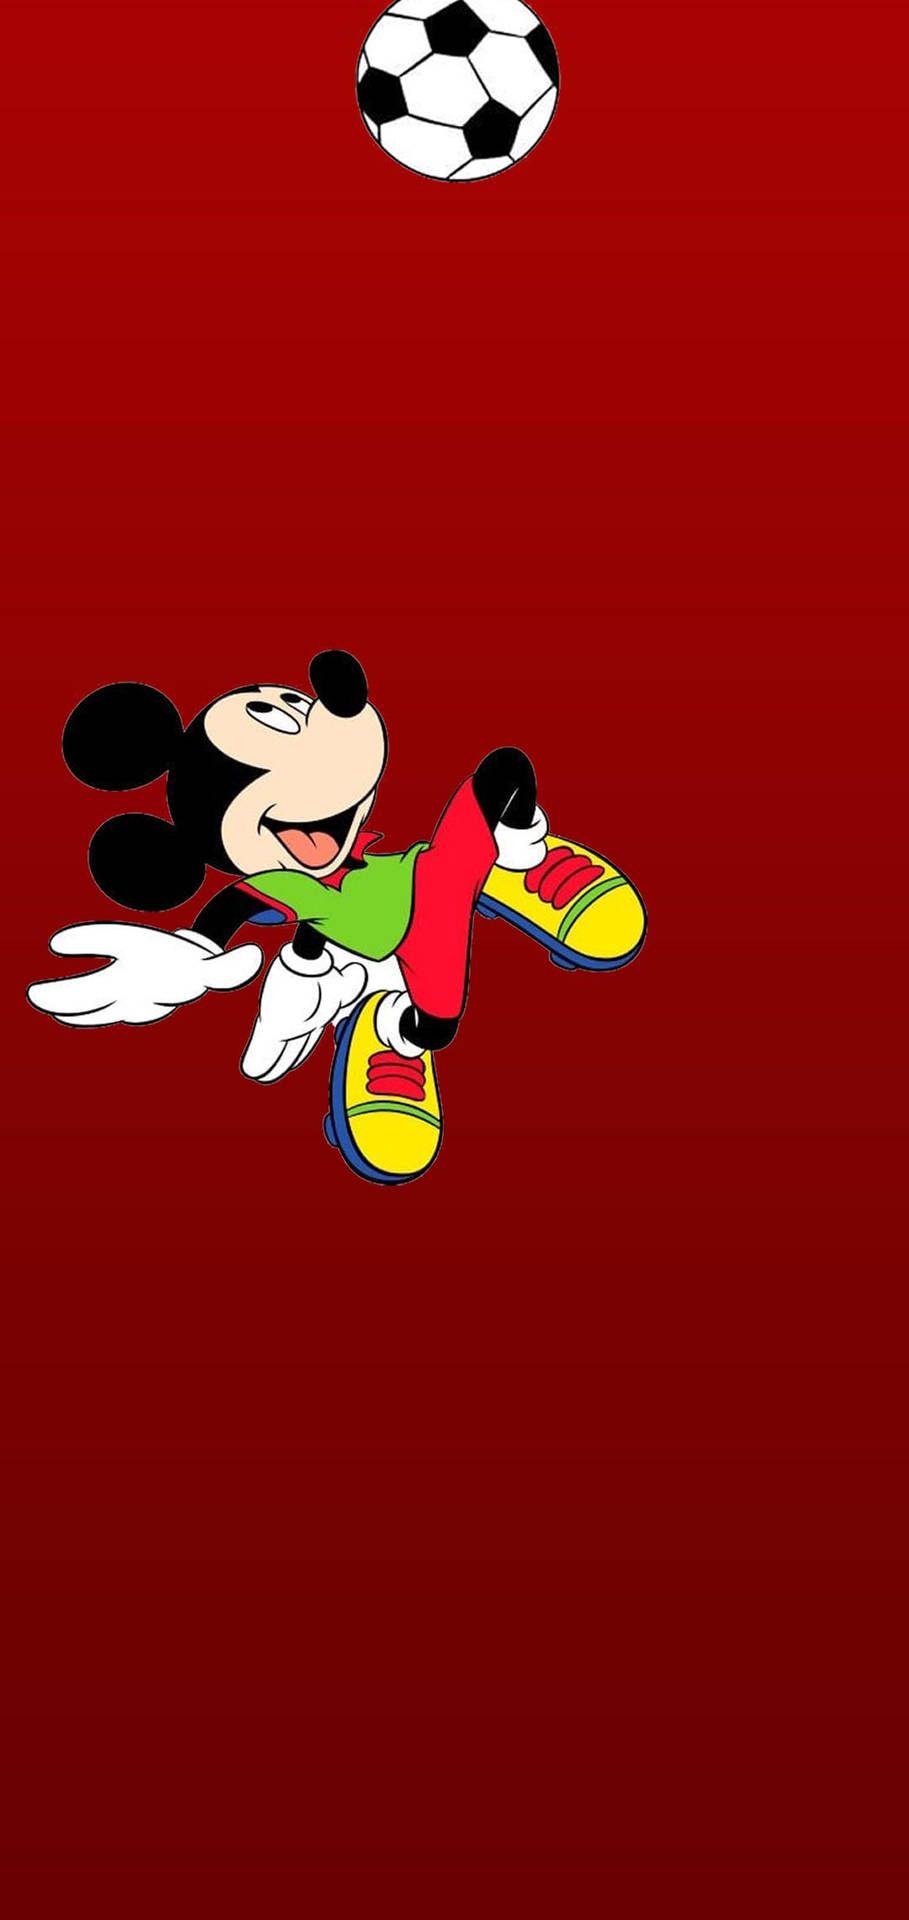 Mickey mouse wallpaper hd for desktop - Mickey Mouse